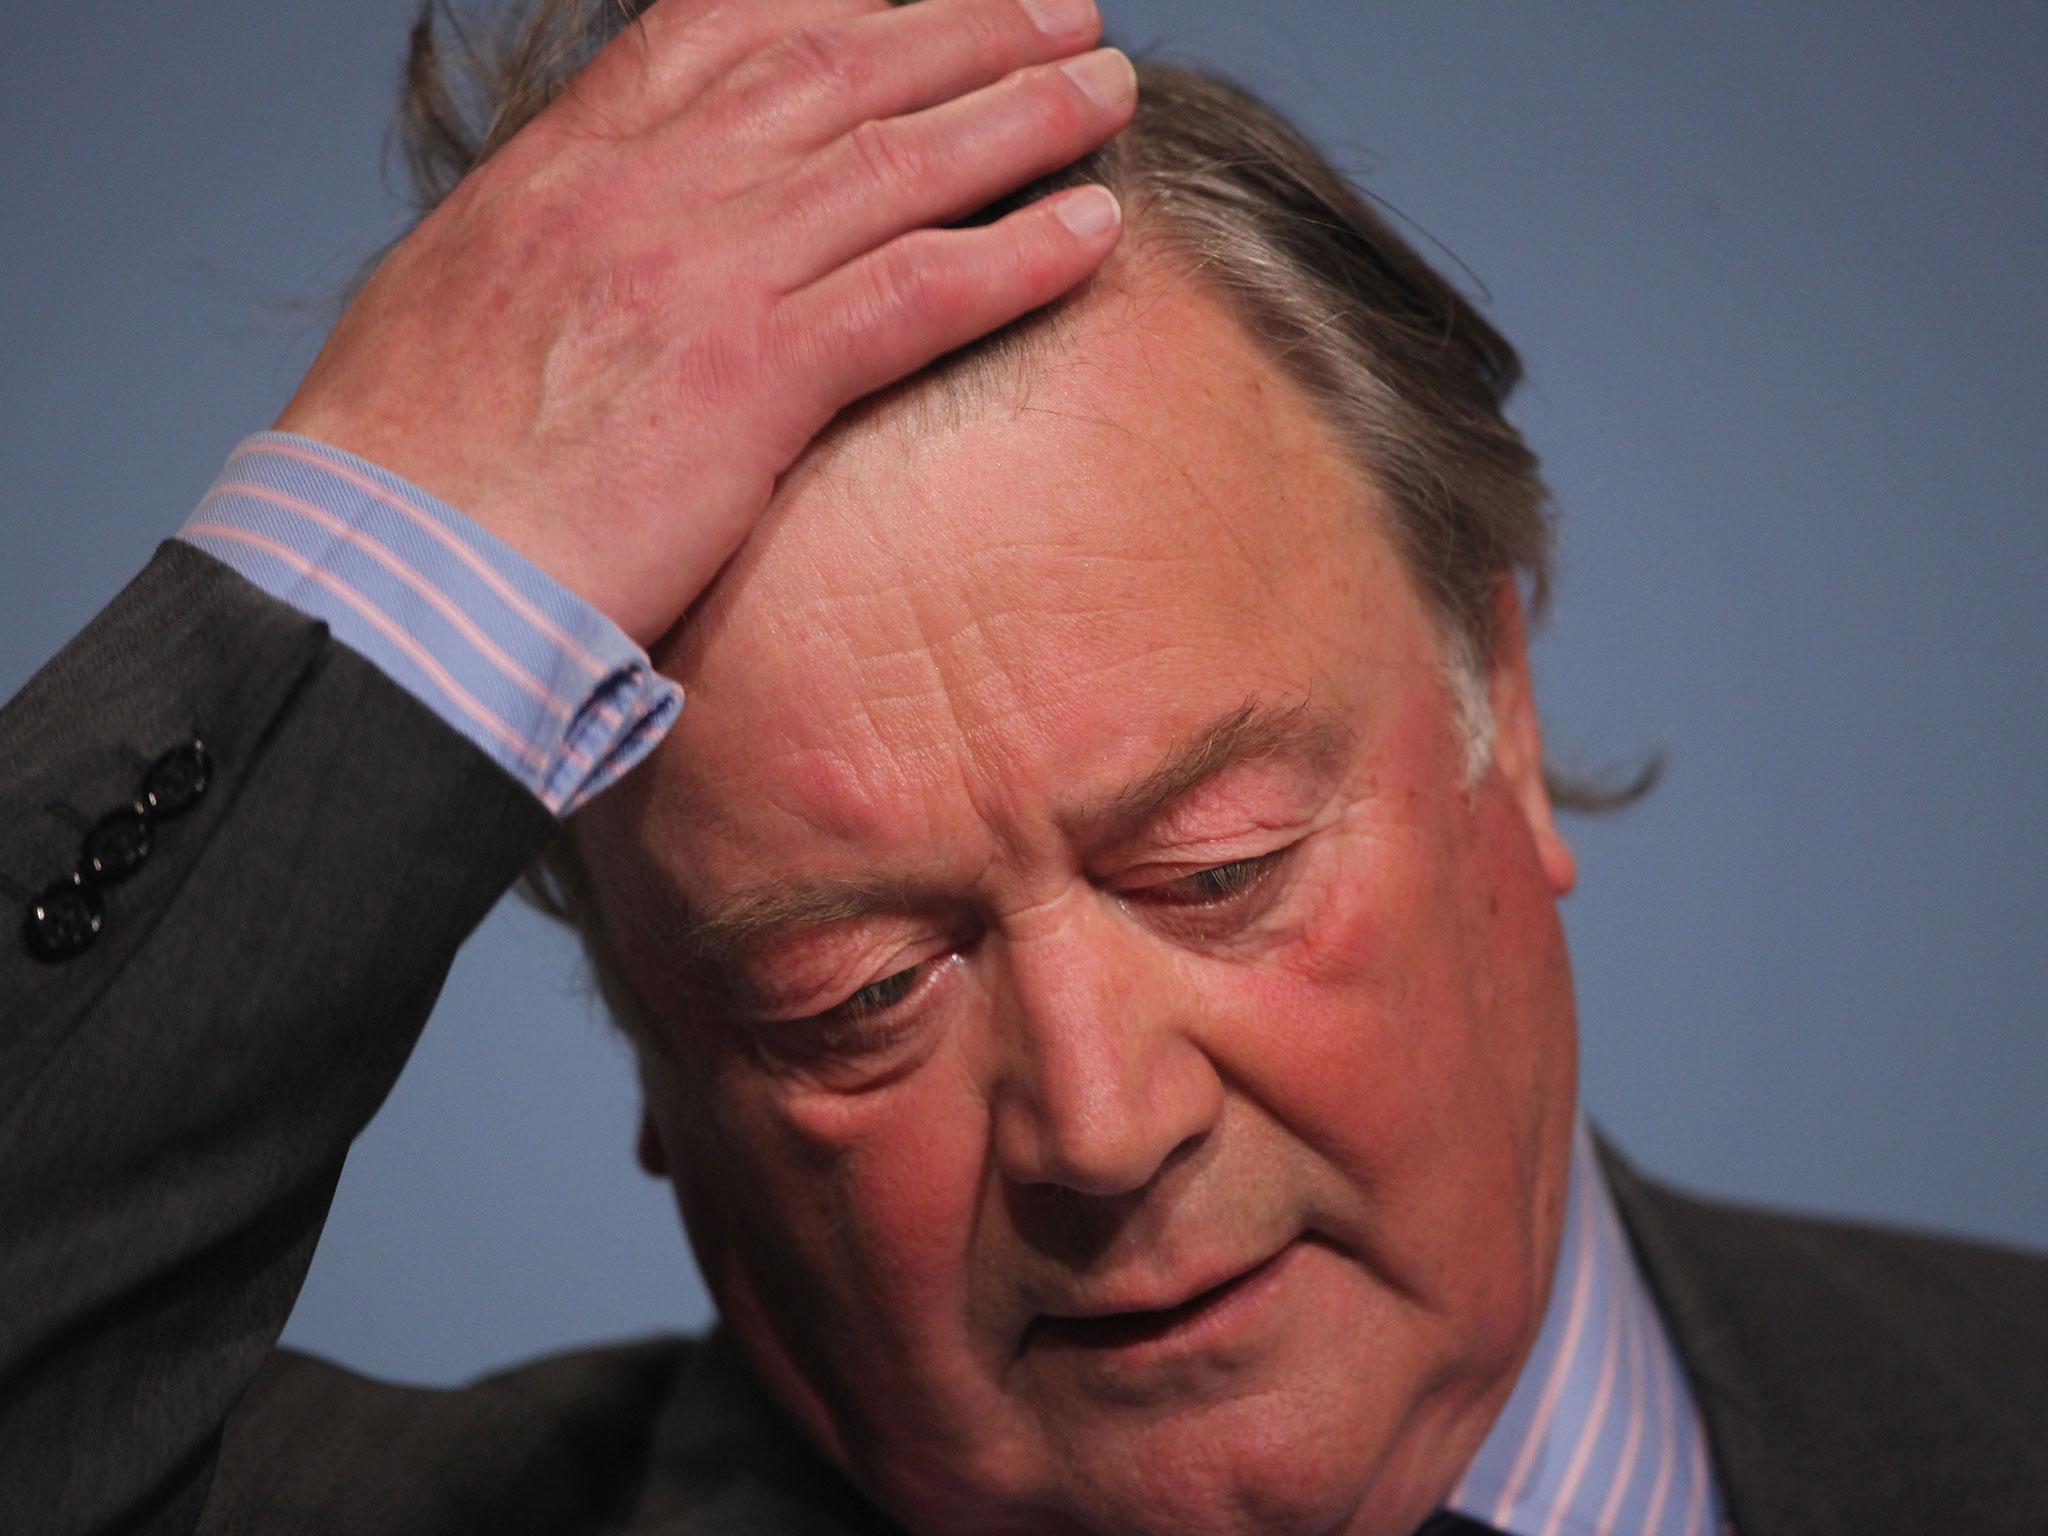 Former Tory Cabinet minister Ken Clarke has made appearances on BBC Question Time for more than 30 years